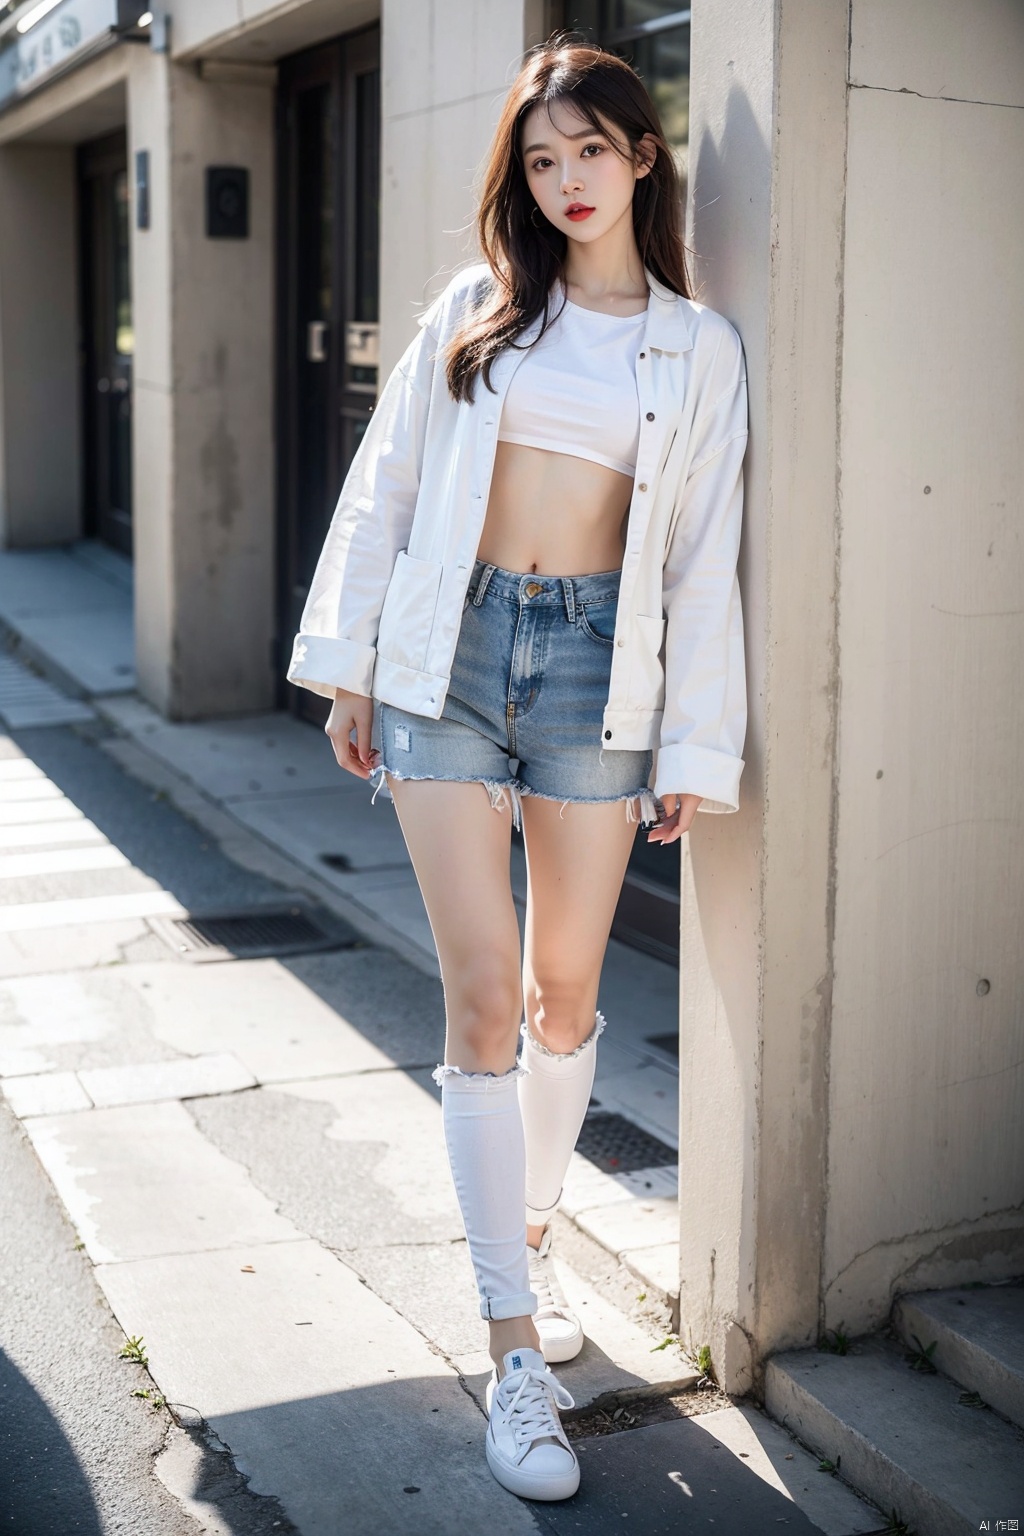 best quality,hd,8k,realistic,
1girl,alice,solo,chinese,full body,whole body,long hair,black mouth mask,white chest wrapping,white short jeans,denim jacket,sneakers,lips,red lips,
dorm,